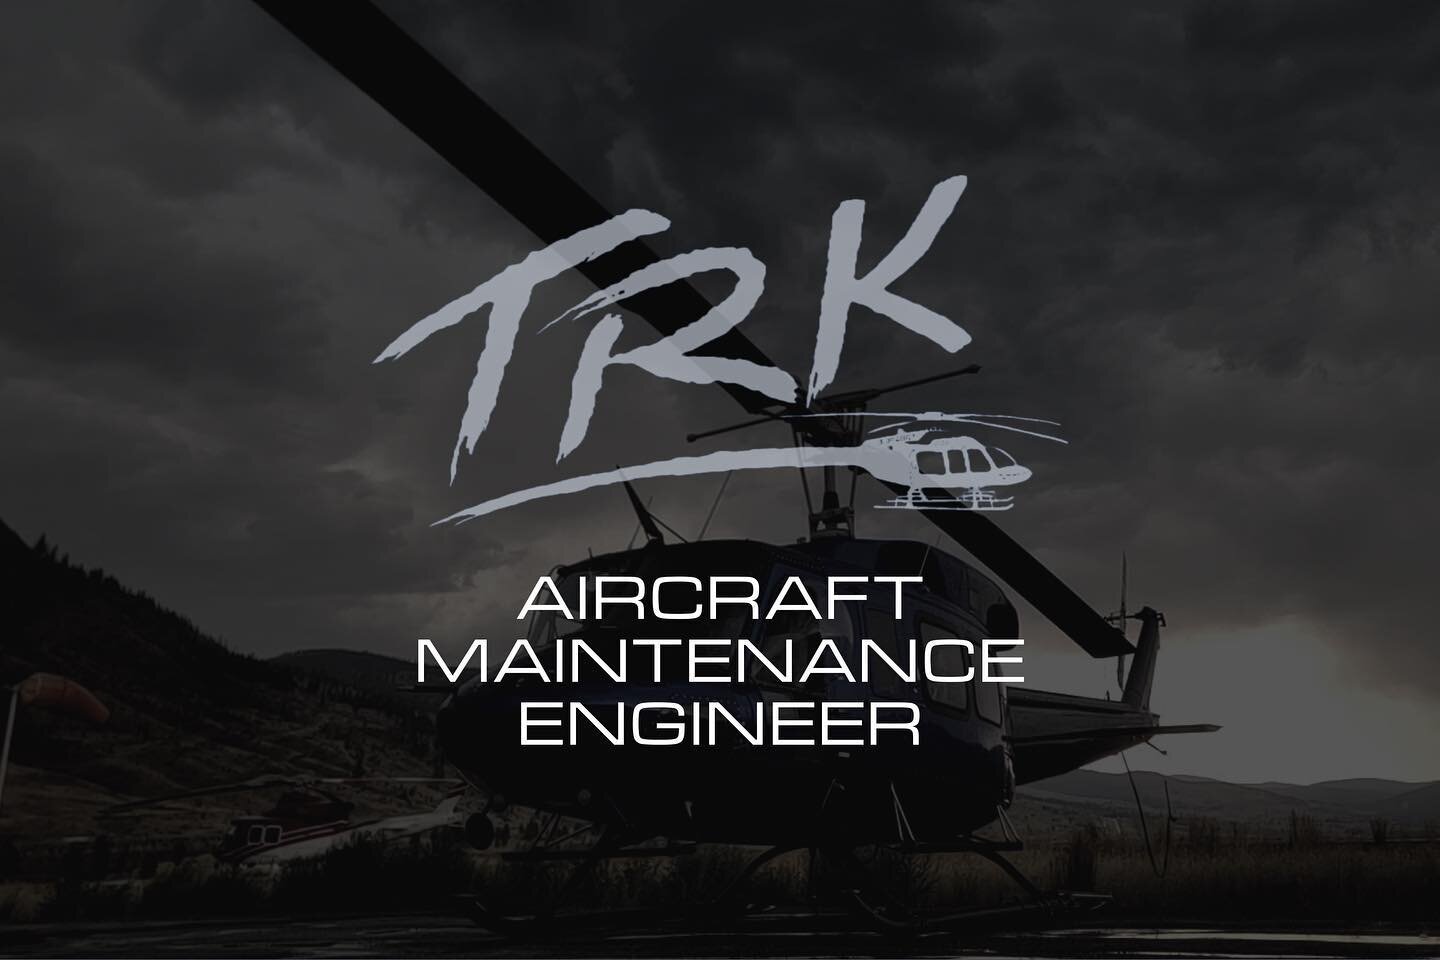 TRK Helicopters&rsquo; sister company TRK Aviation is currently hiring full-time Licensed Rotary Wing Aircraft Maintenance Engineers - Cat &quot;M&quot;

The AMEs of TRK Aviation are responsible for all maintenance carried out on TRK Helicopters&rsqu